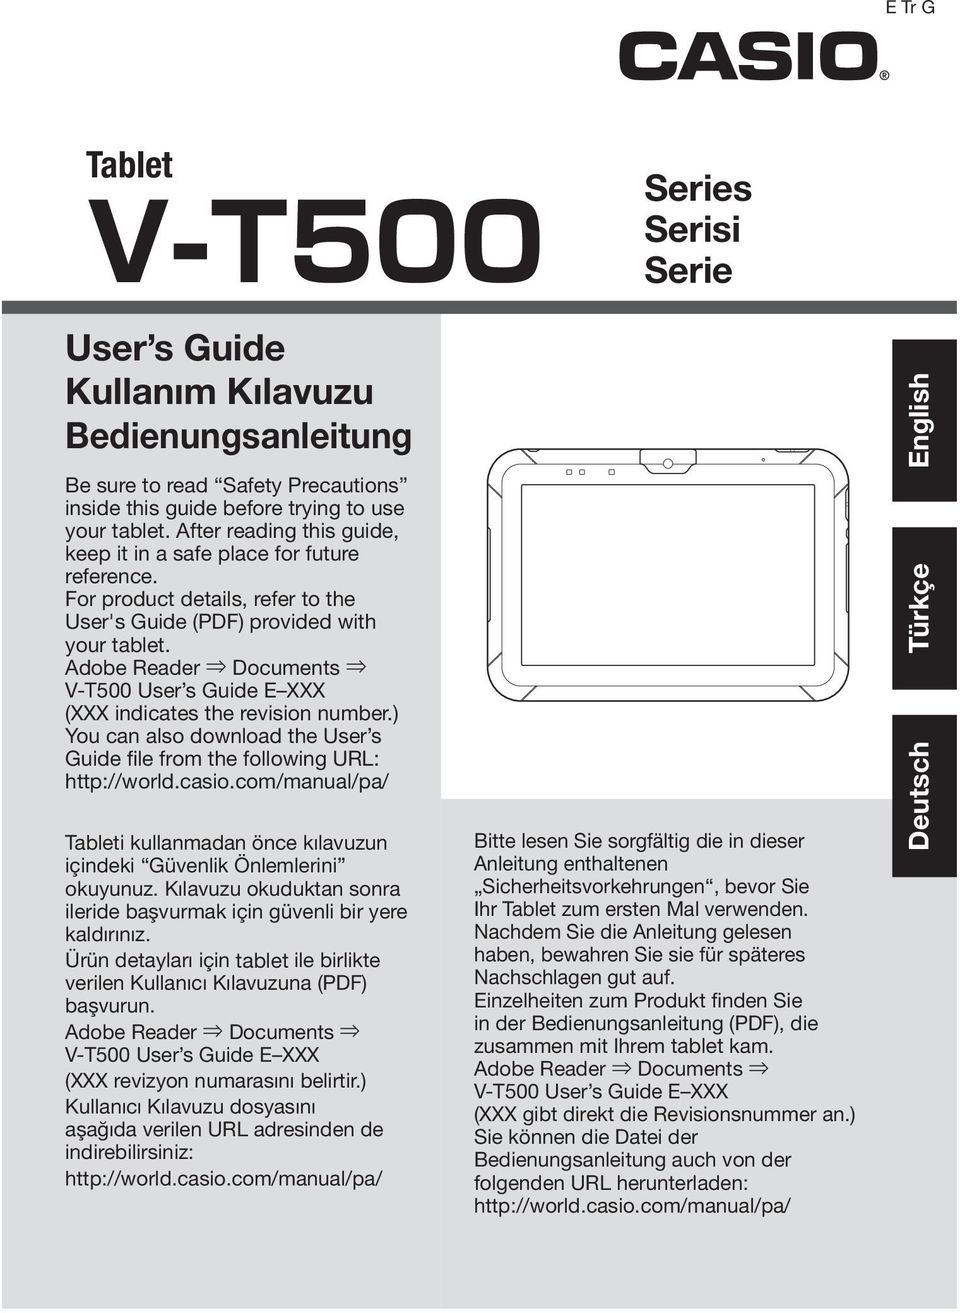 Adobe Reader Documents V-T500 User s Guide E XXX (XXX indicates the revision number.) You can also download the User s Guide file from the following URL: http://world.casio.